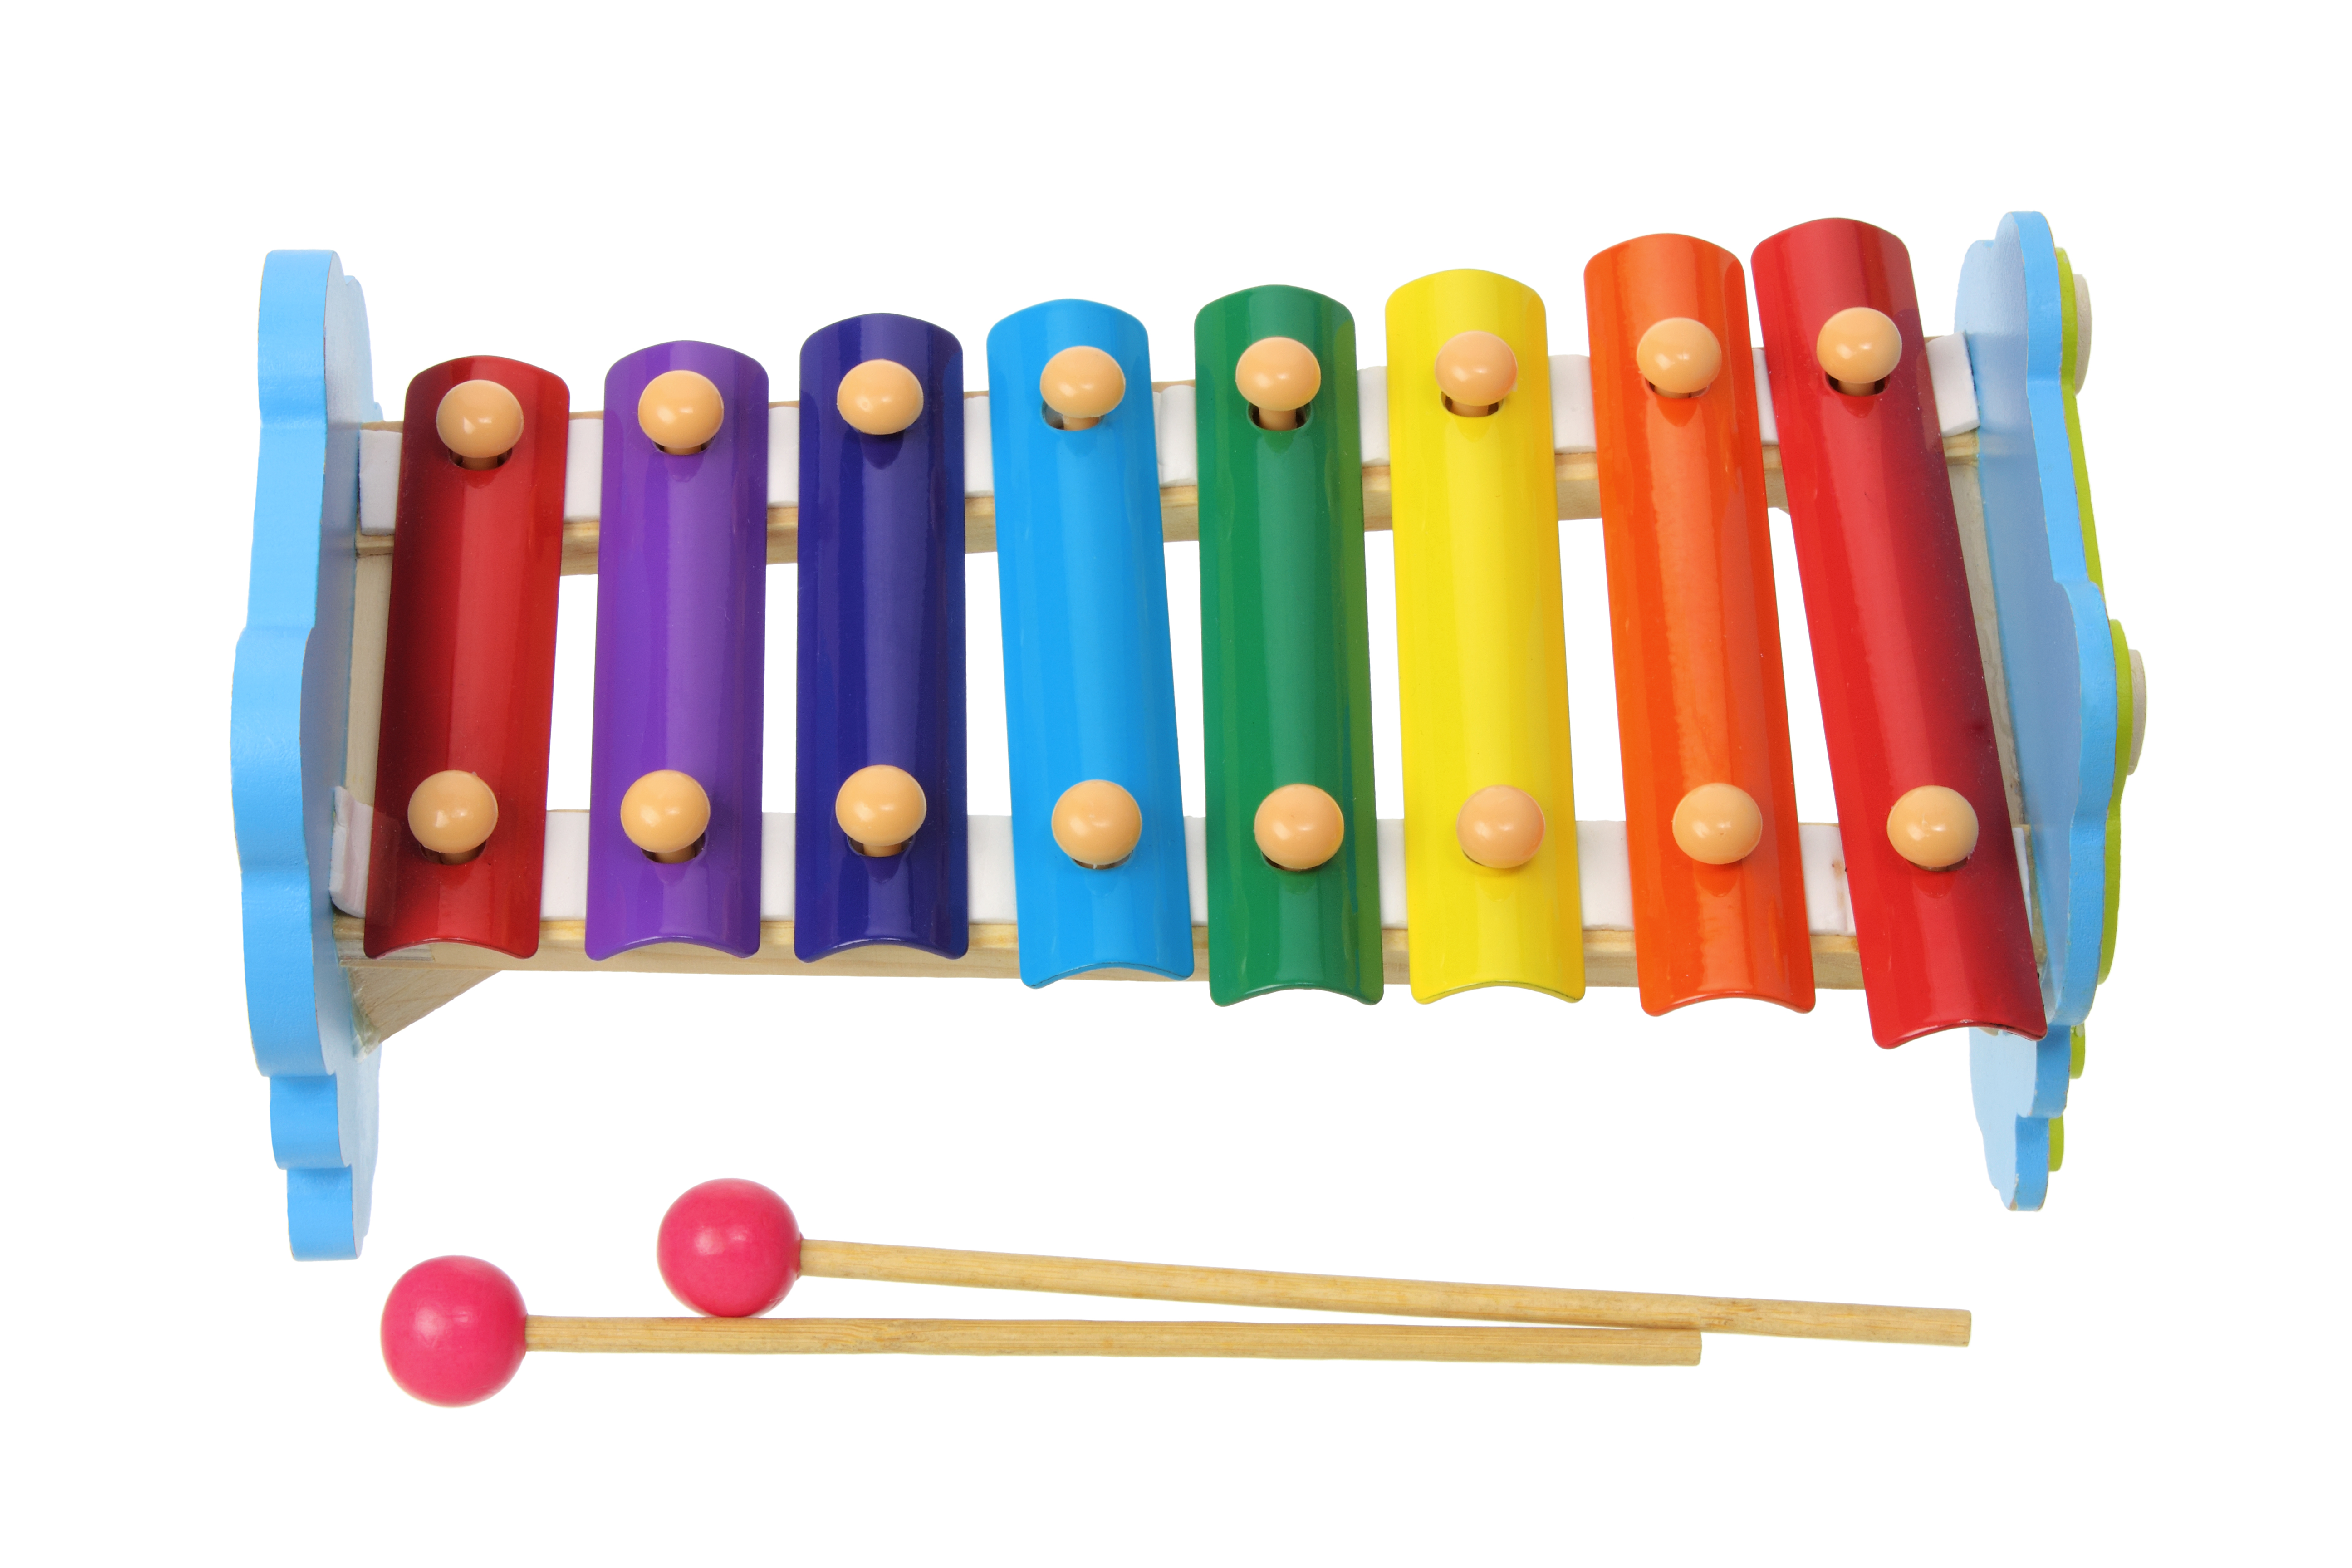 Toy Xylophone on White Background